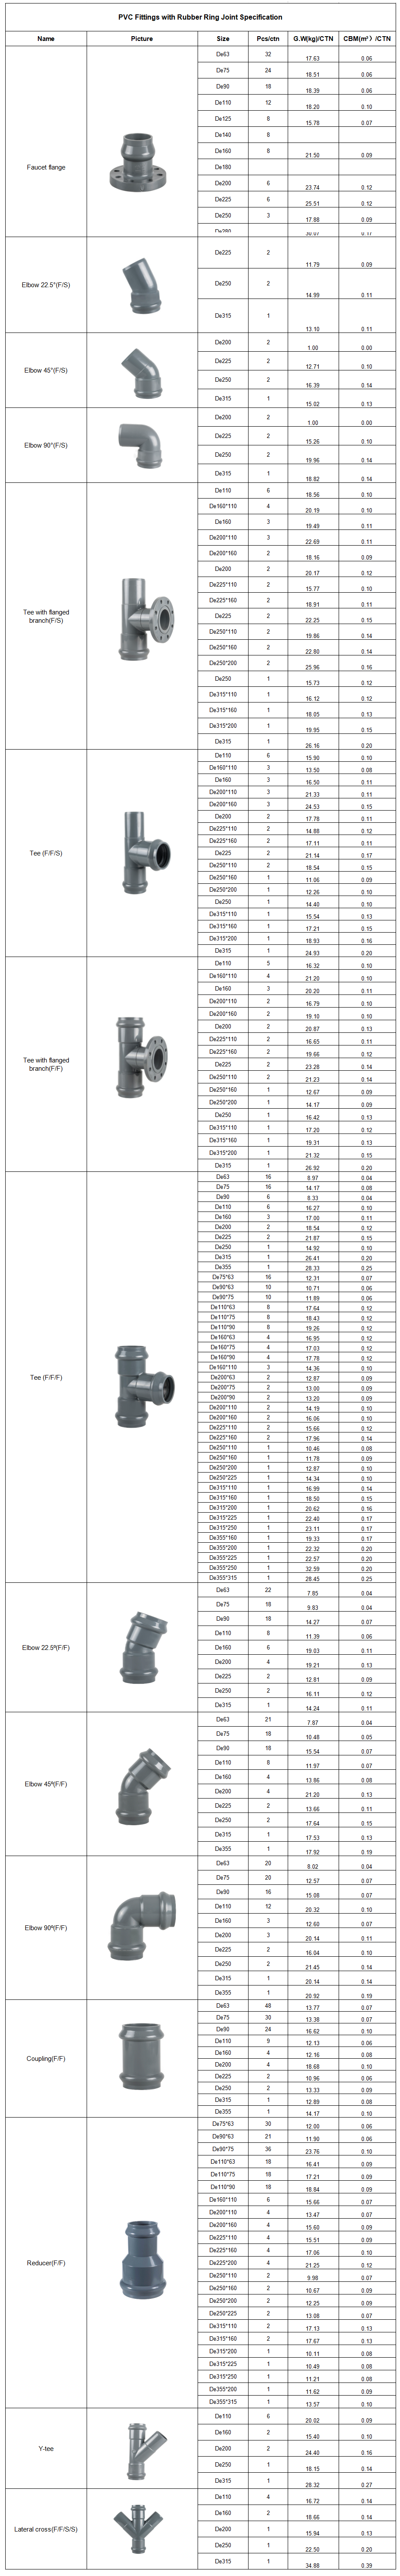 PVC Fittings with Rubber Ring Joint Specification